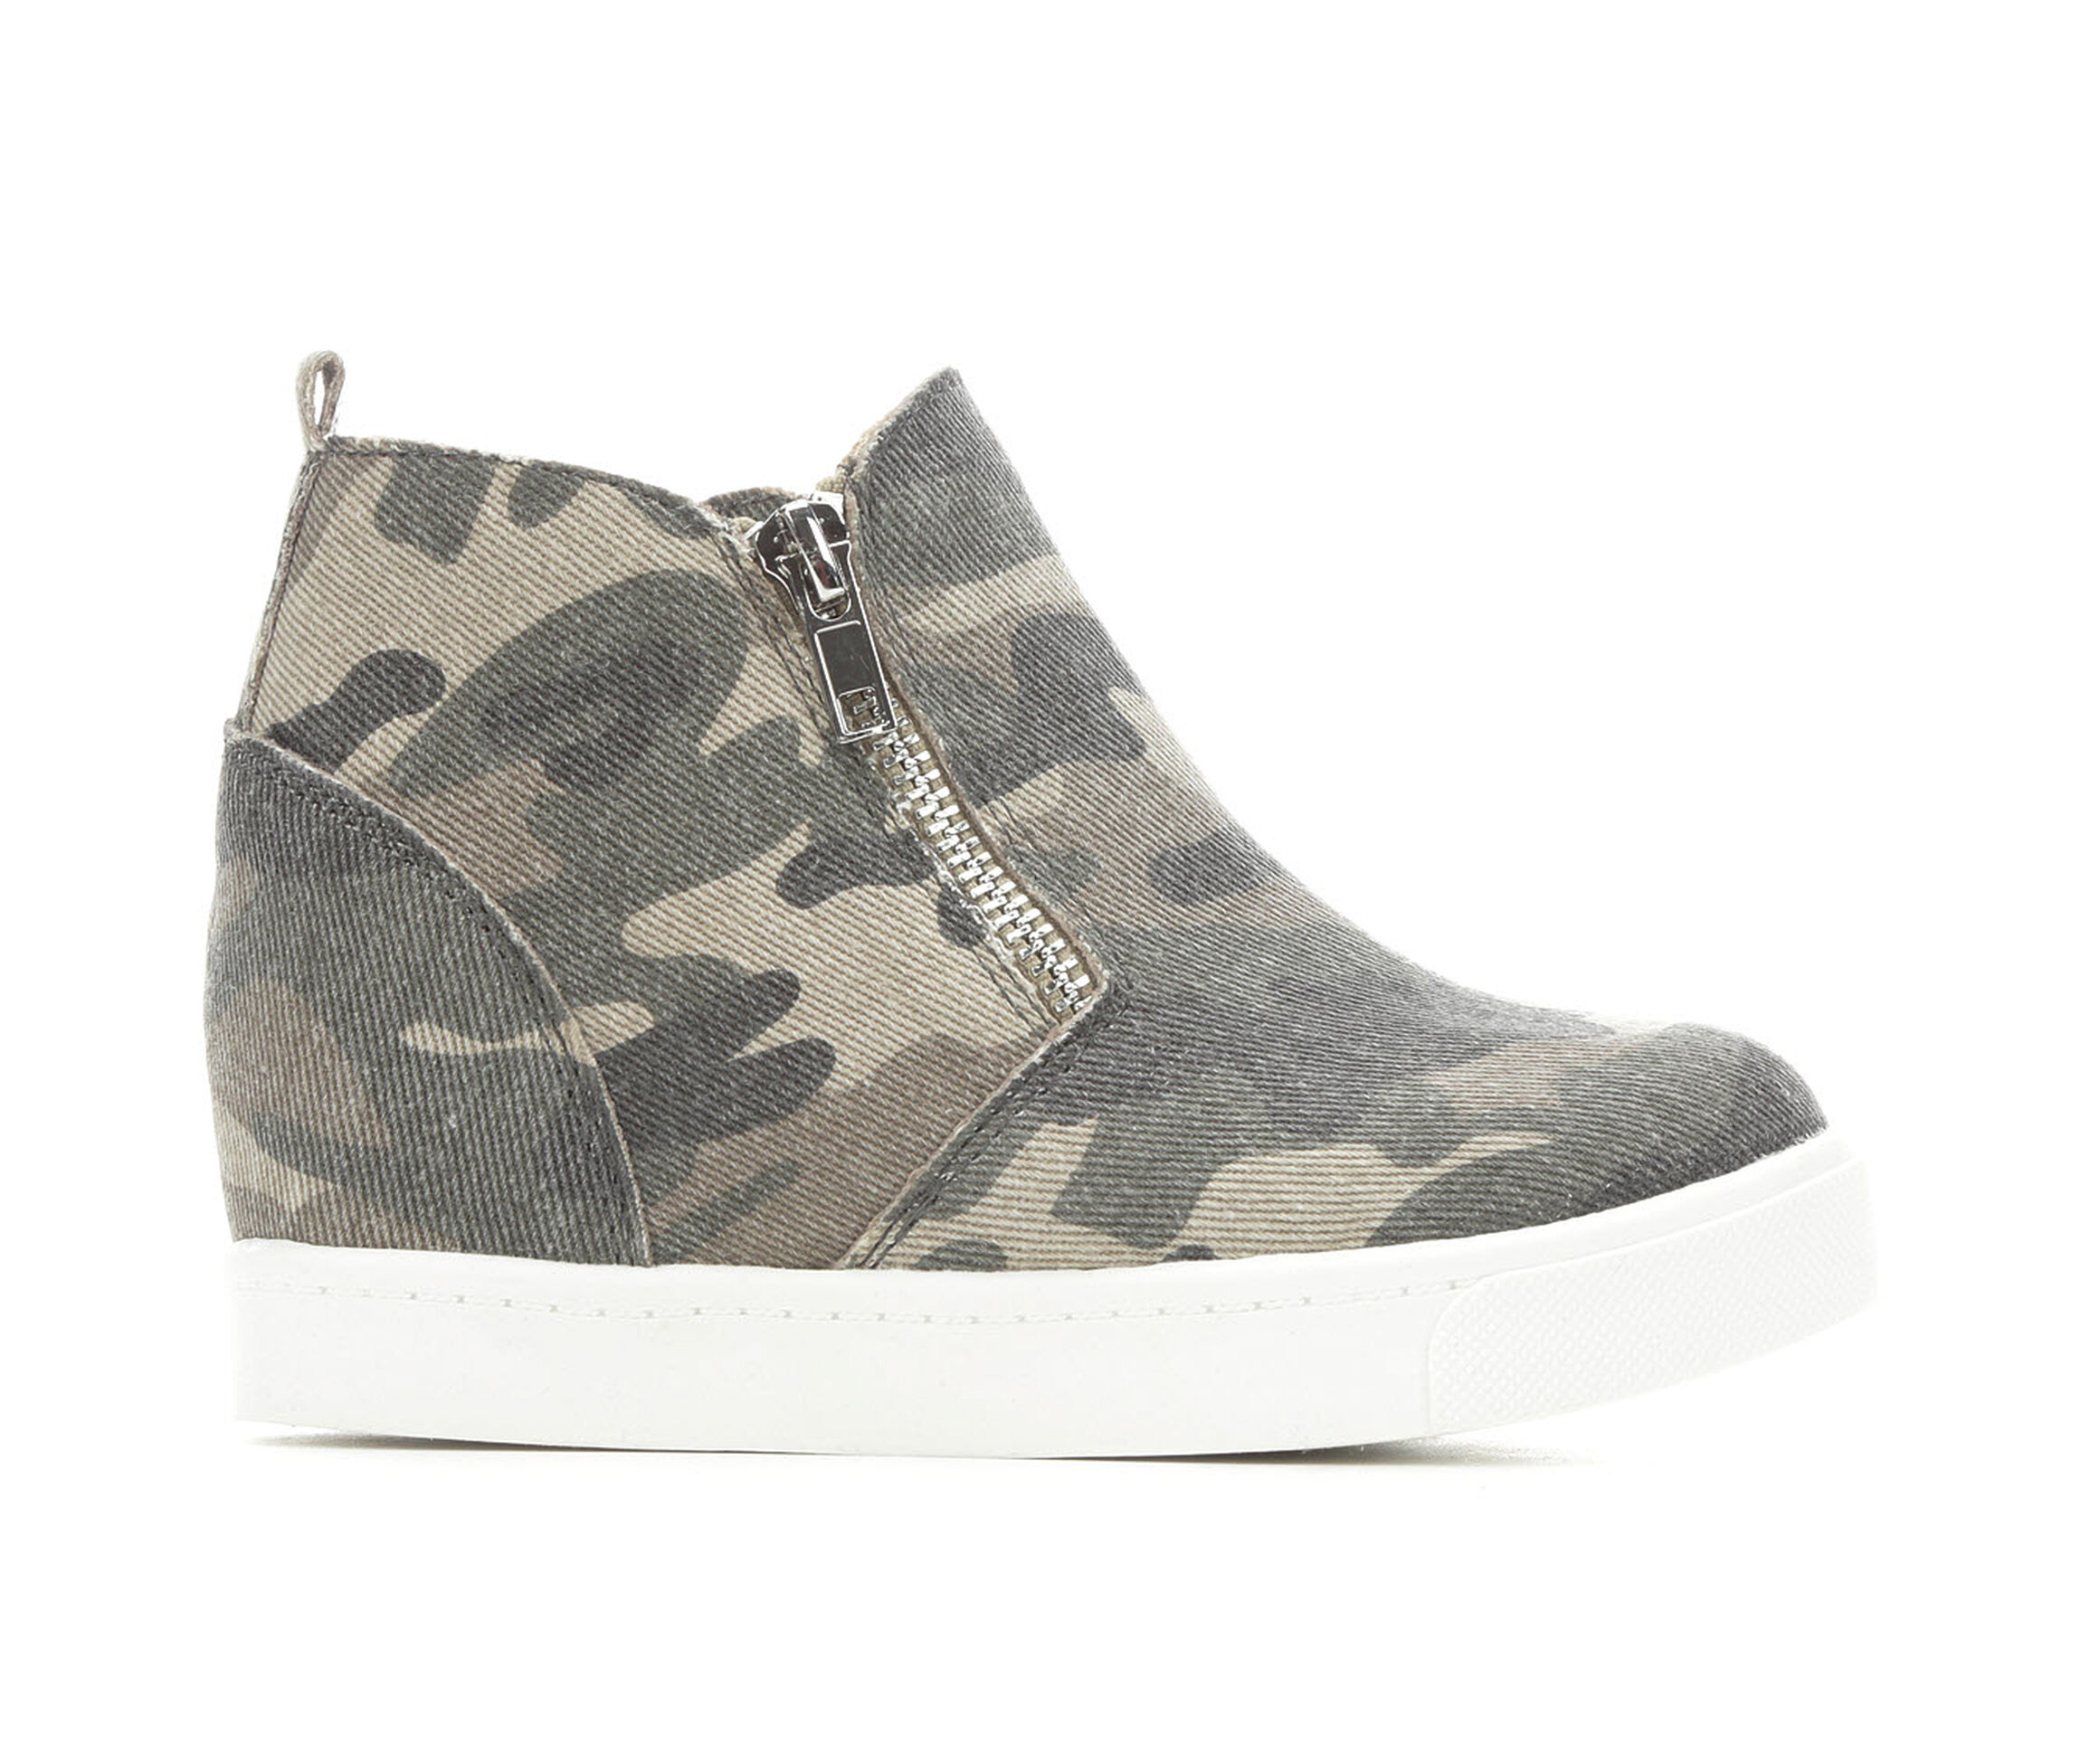 youth wedge sneakers